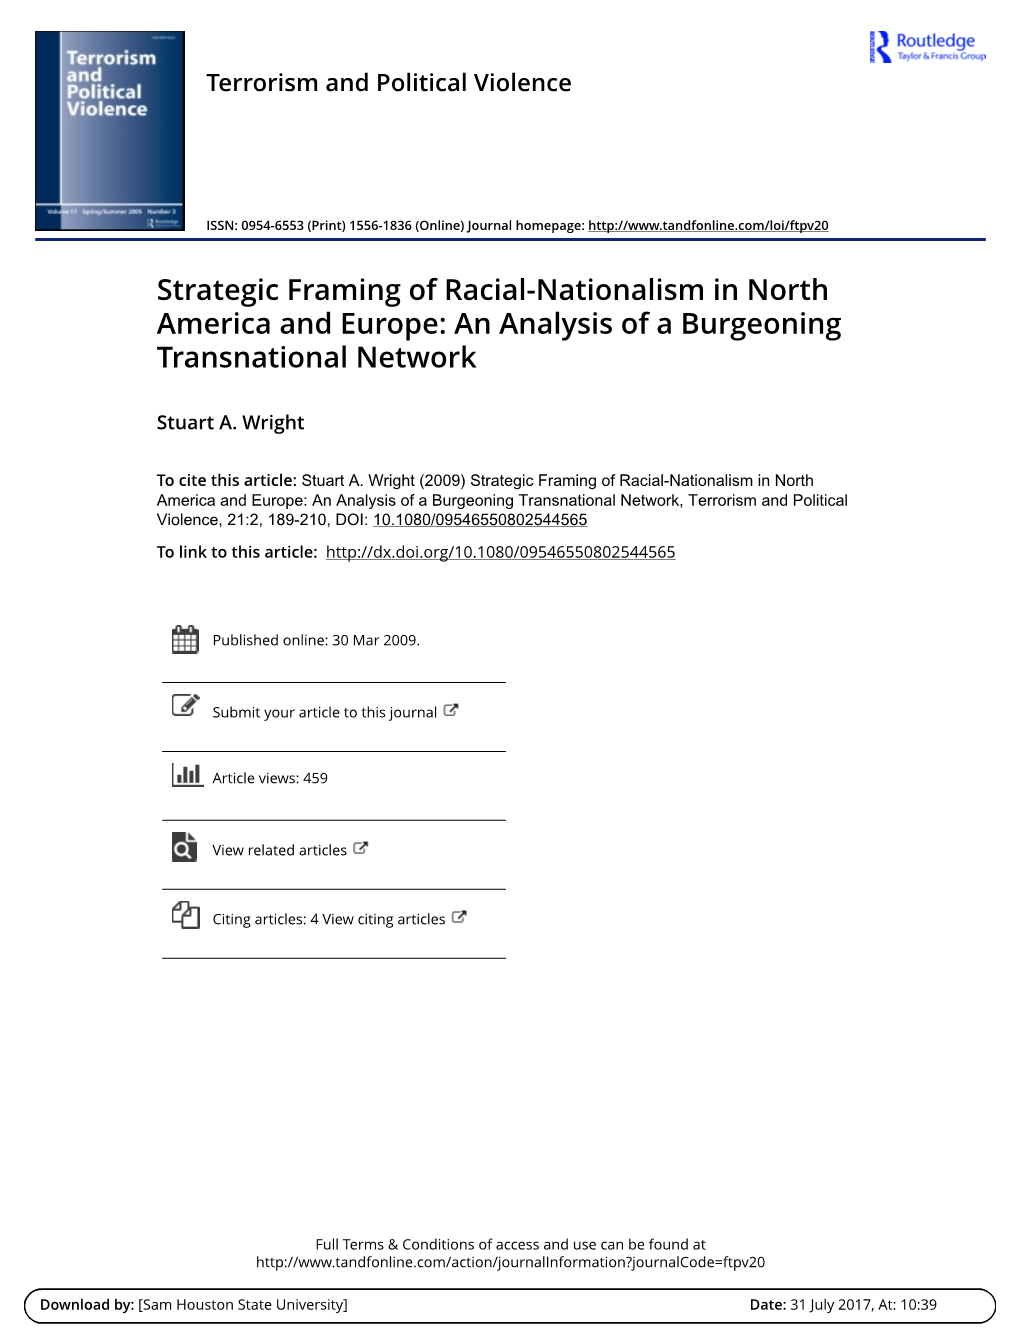 Strategic Framing of Racial-Nationalism in North America and Europe: an Analysis of a Burgeoning Transnational Network